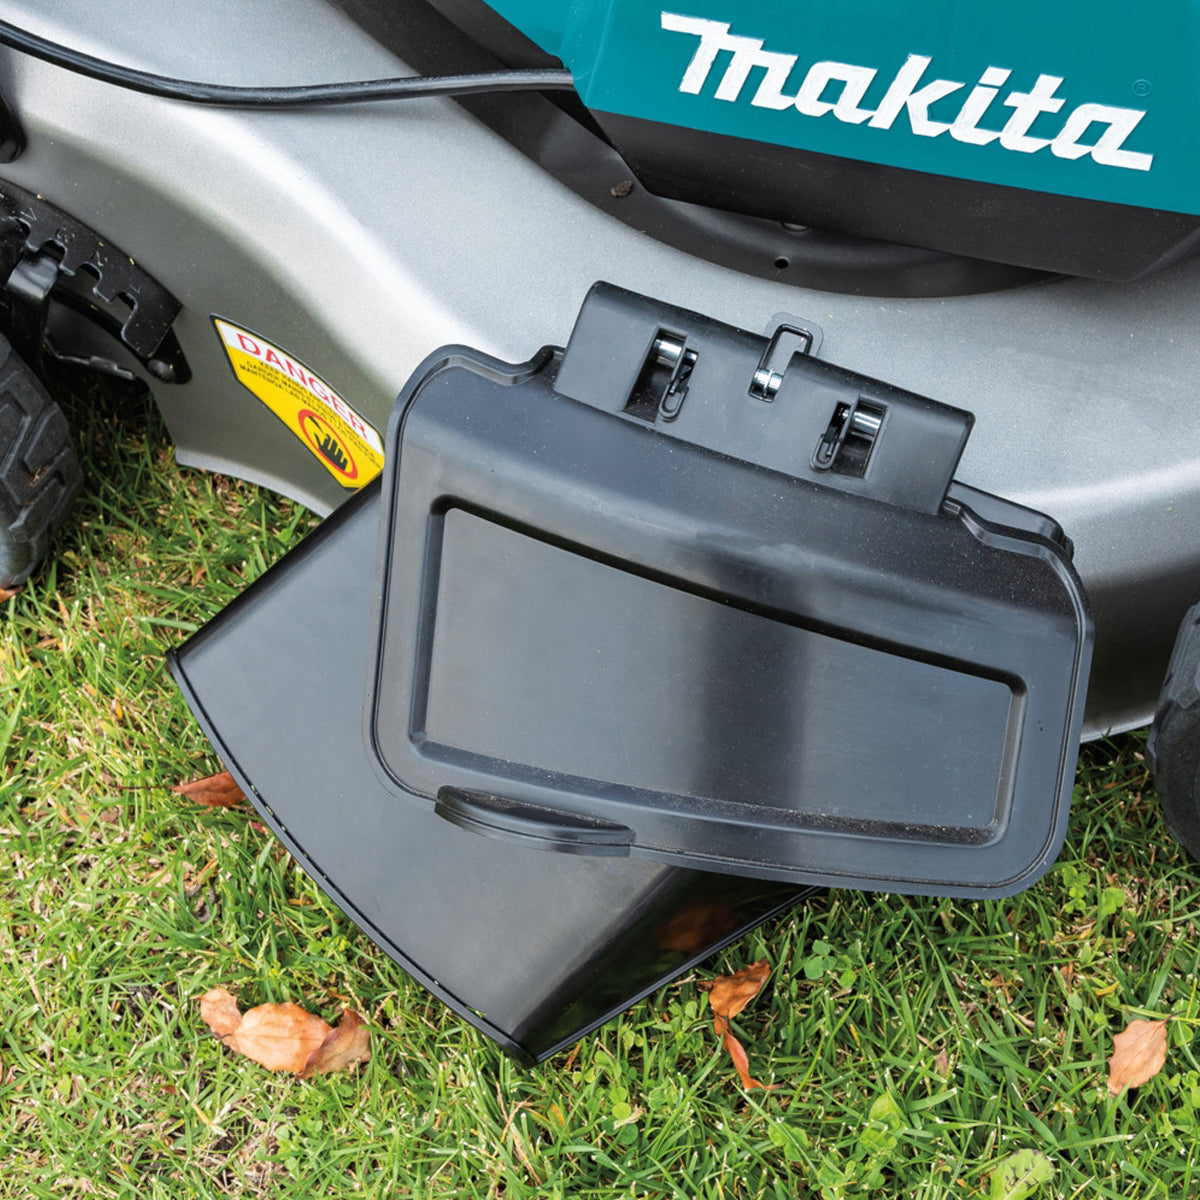 Makita DLM532PT4 36V LXT Brushless 530mm Lawn Mower With 4 x 5.0Ah Batteries & Twin Port Charger